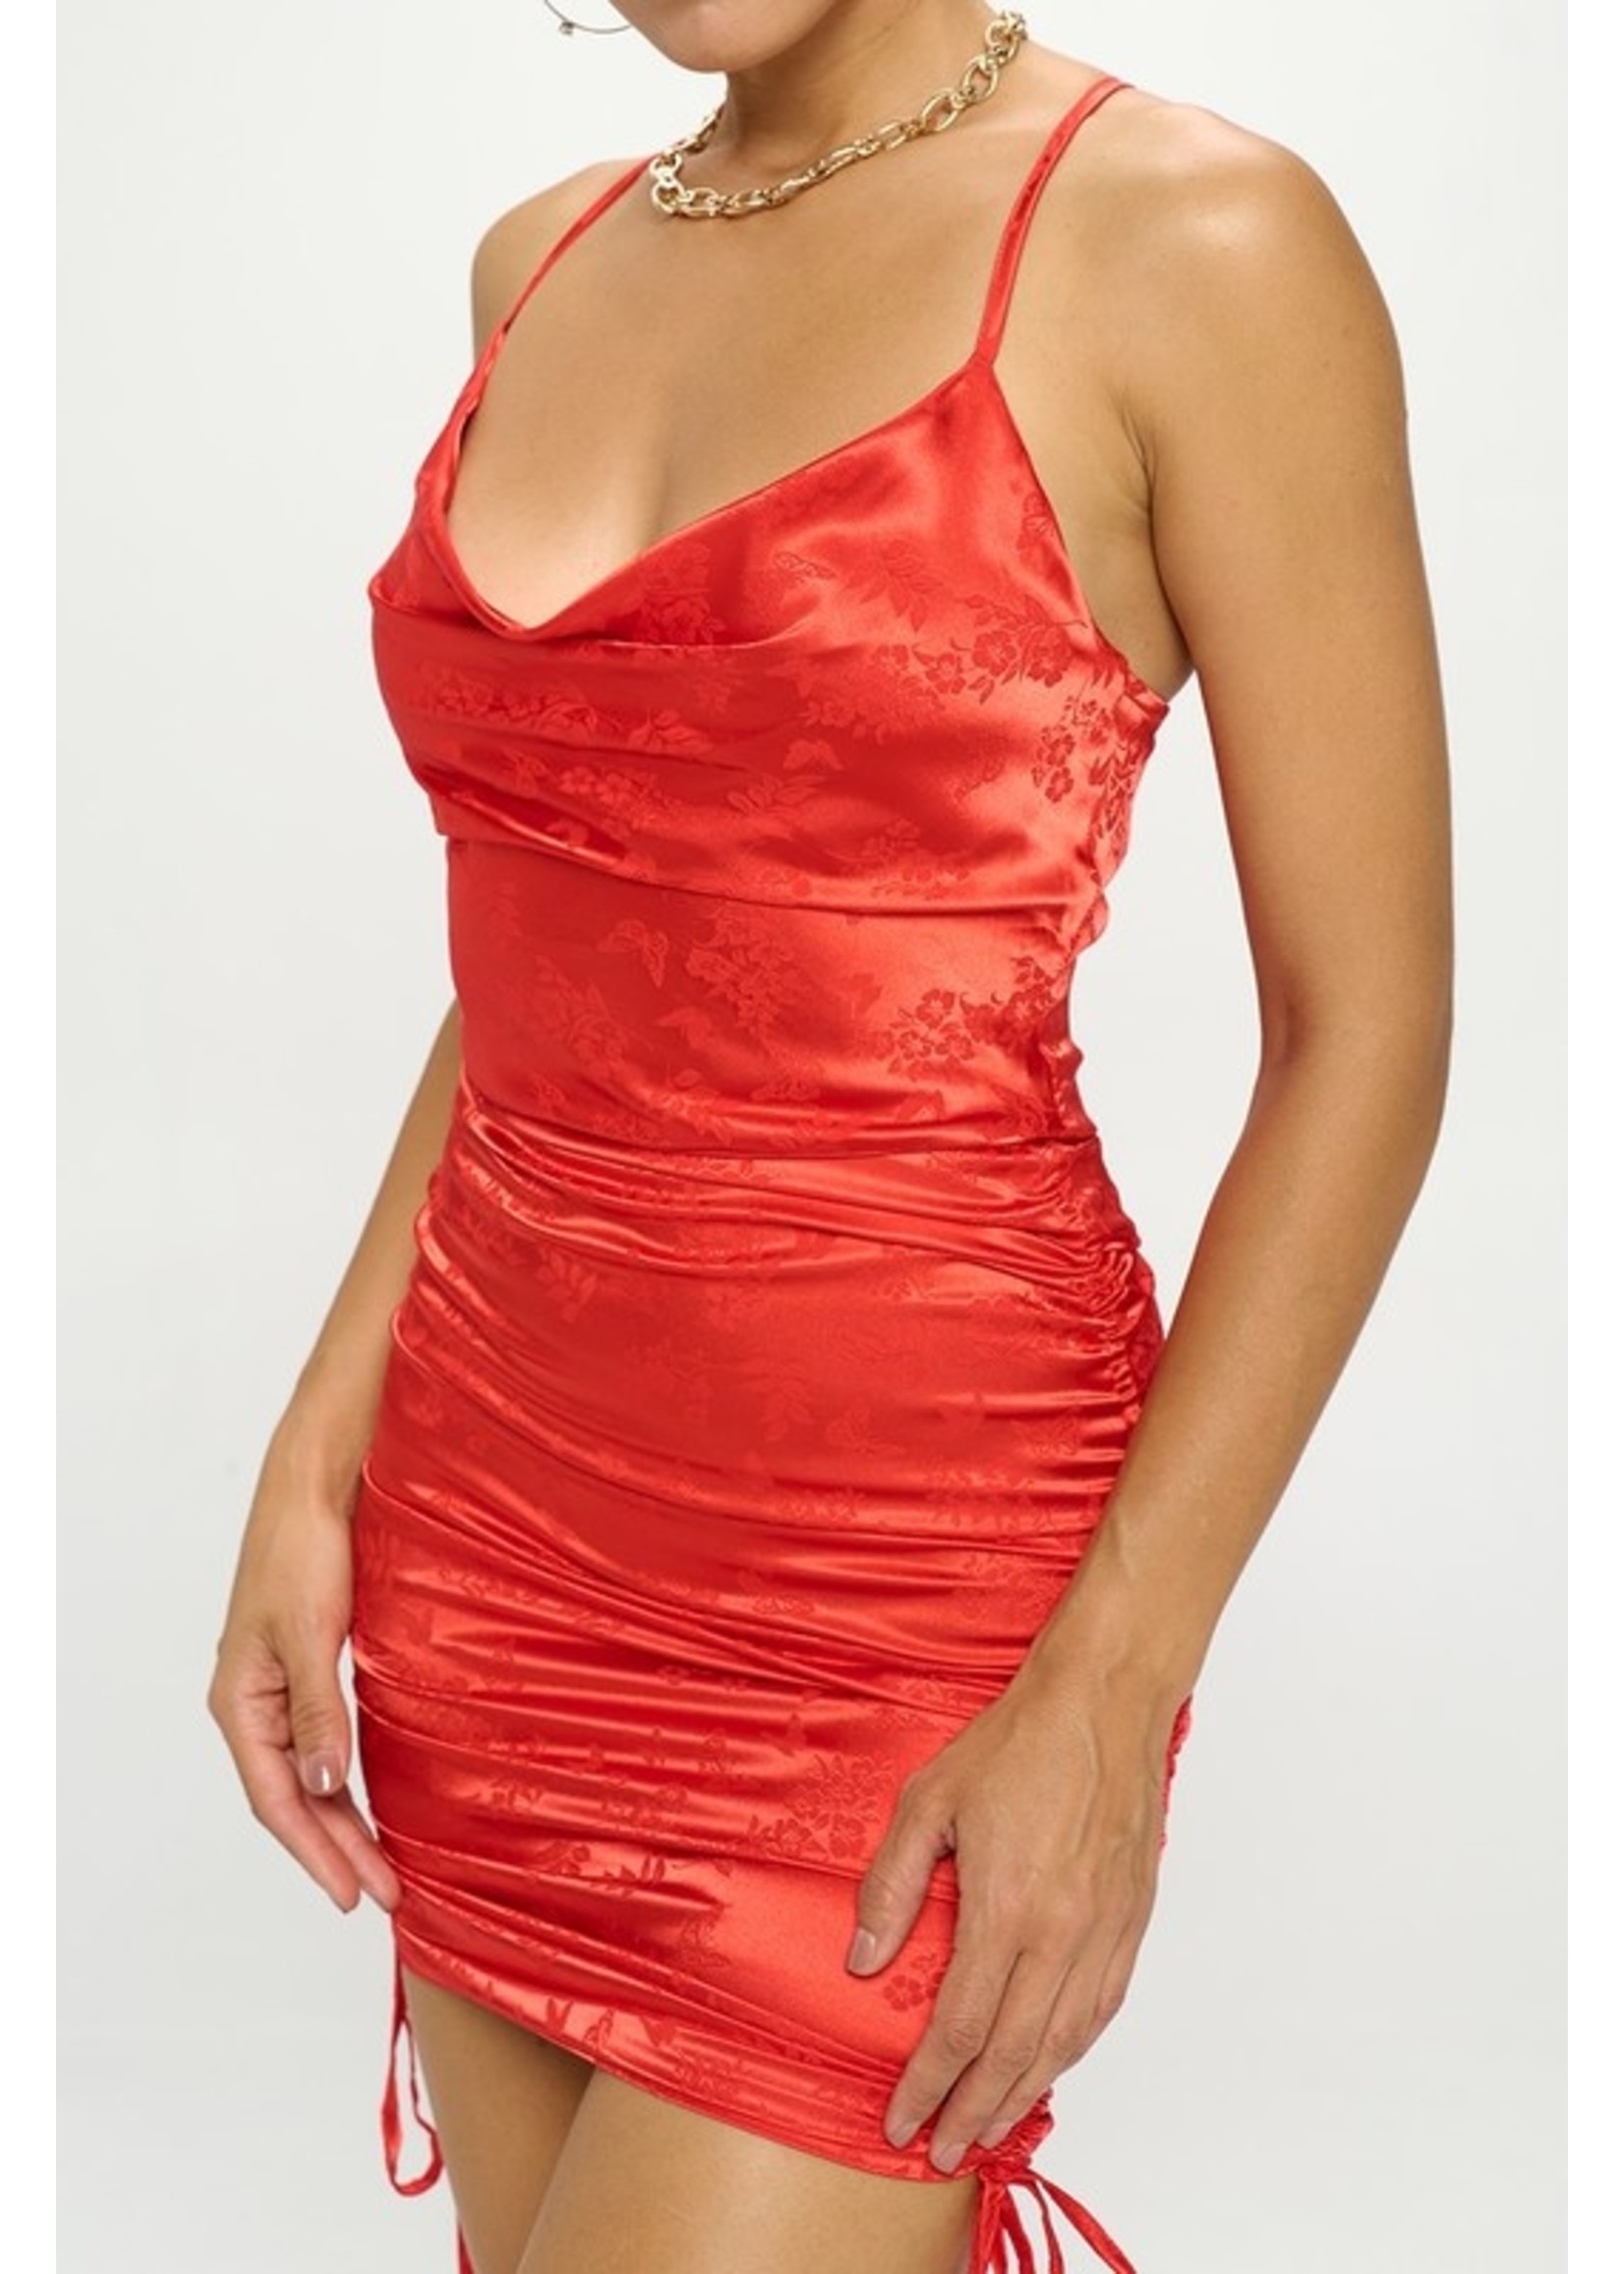 Oh Yes Stand Strong Dress Red